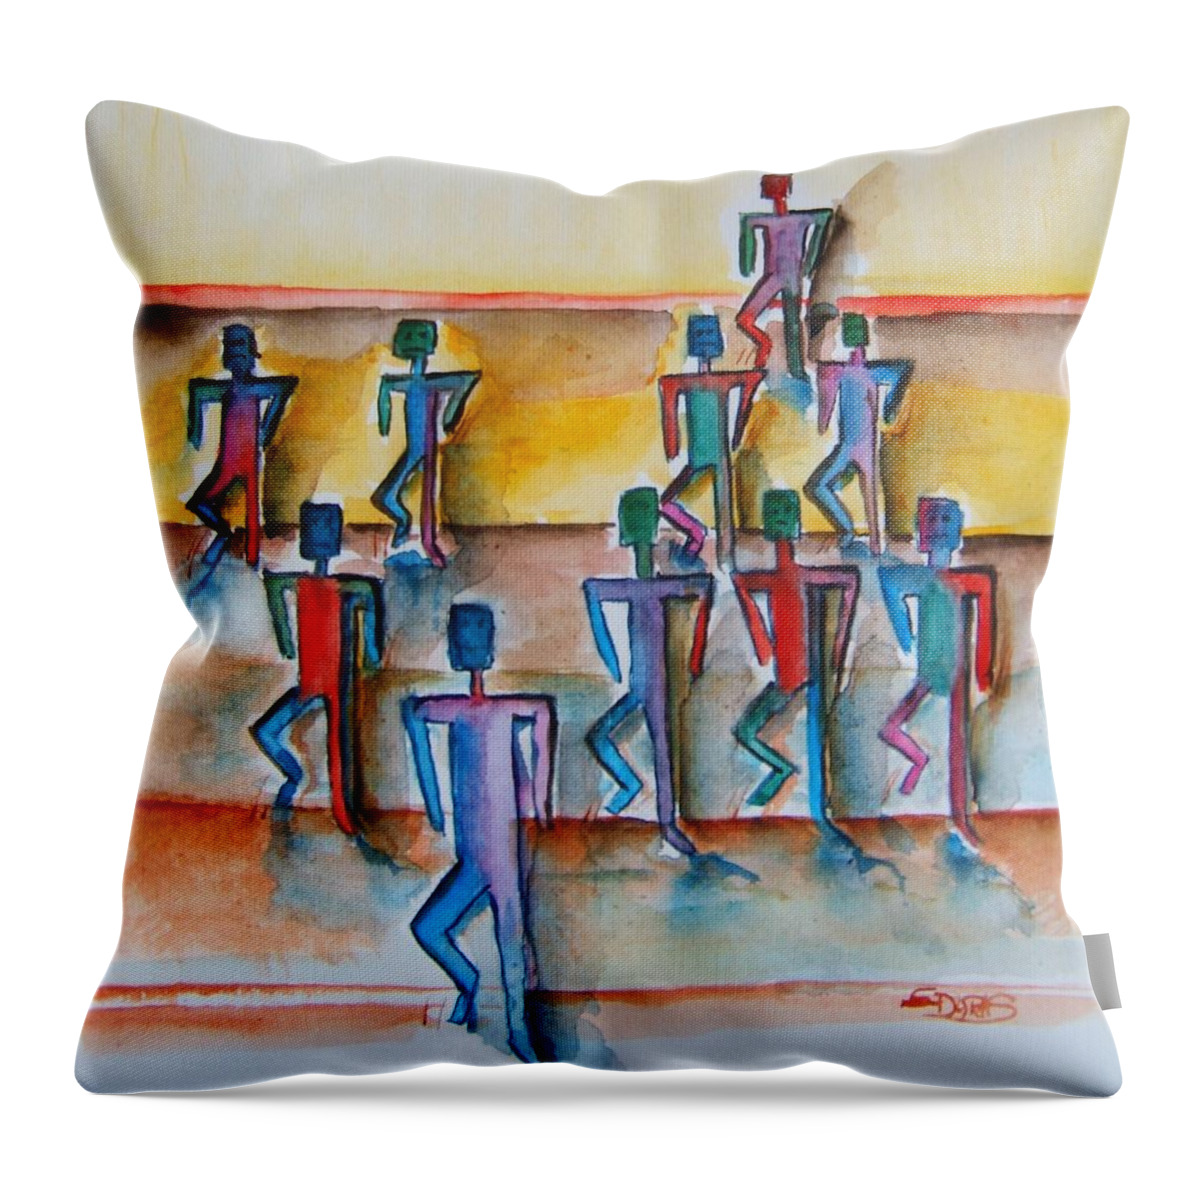 Stickman Throw Pillow featuring the painting Stickman Performers by Elaine Duras